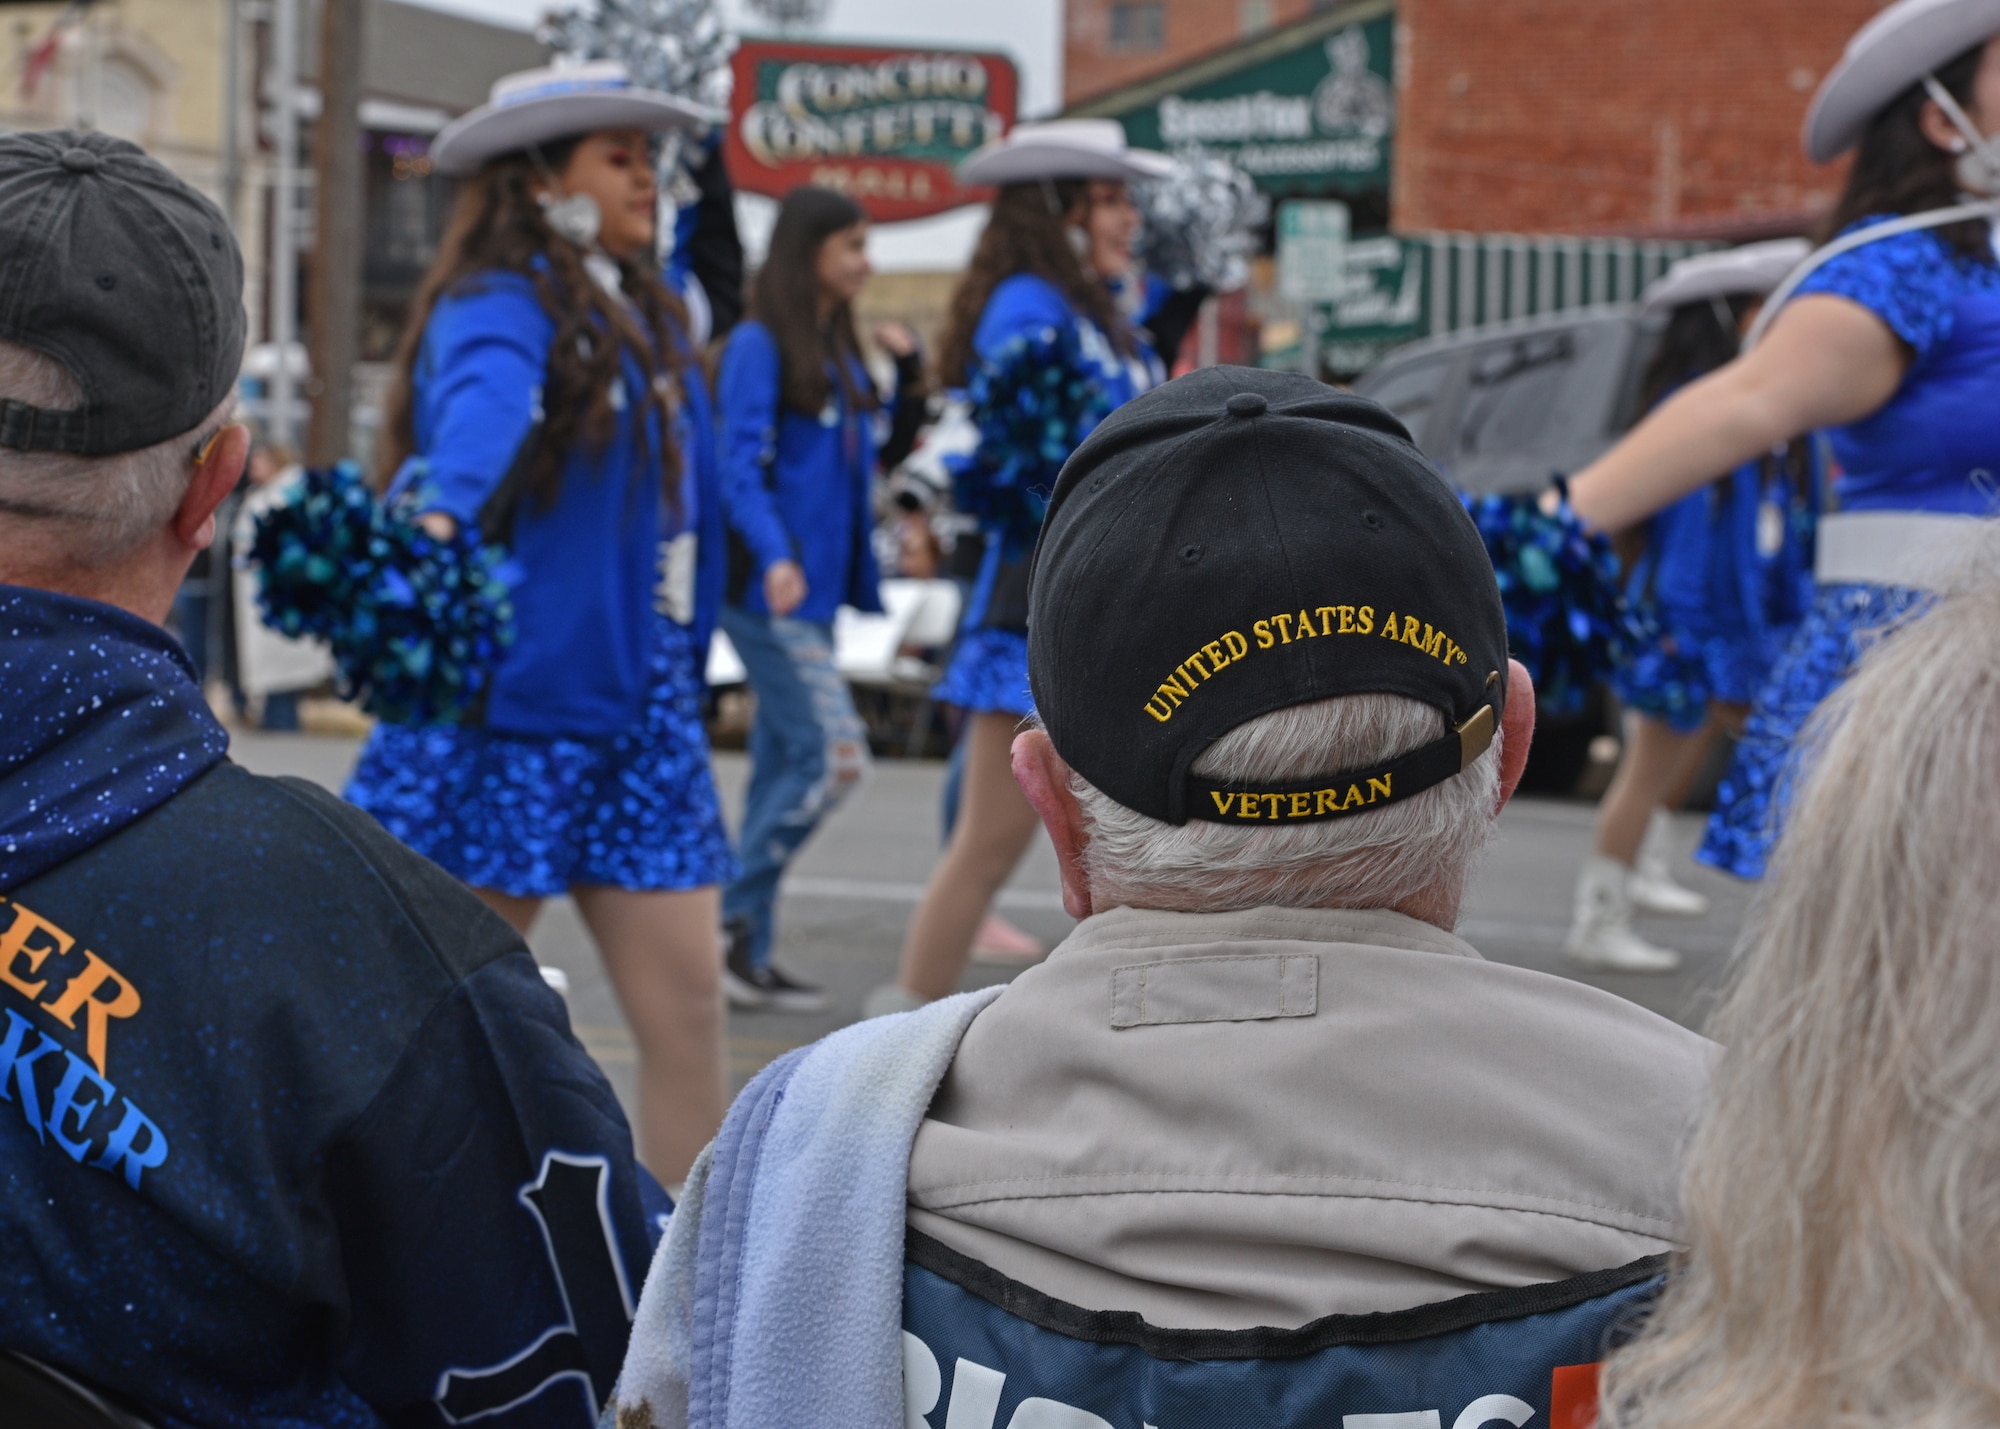 A San Angelo veteran watches the Veterans Day Parade in downtown San Angelo, Texas, Nov. 6, 2021. The Veteran’s Day Parade was held to honor all veterans and military members of the U.S. Armed Forces (U.S. Air Force photo by Senior Airman Ashley Thrash)